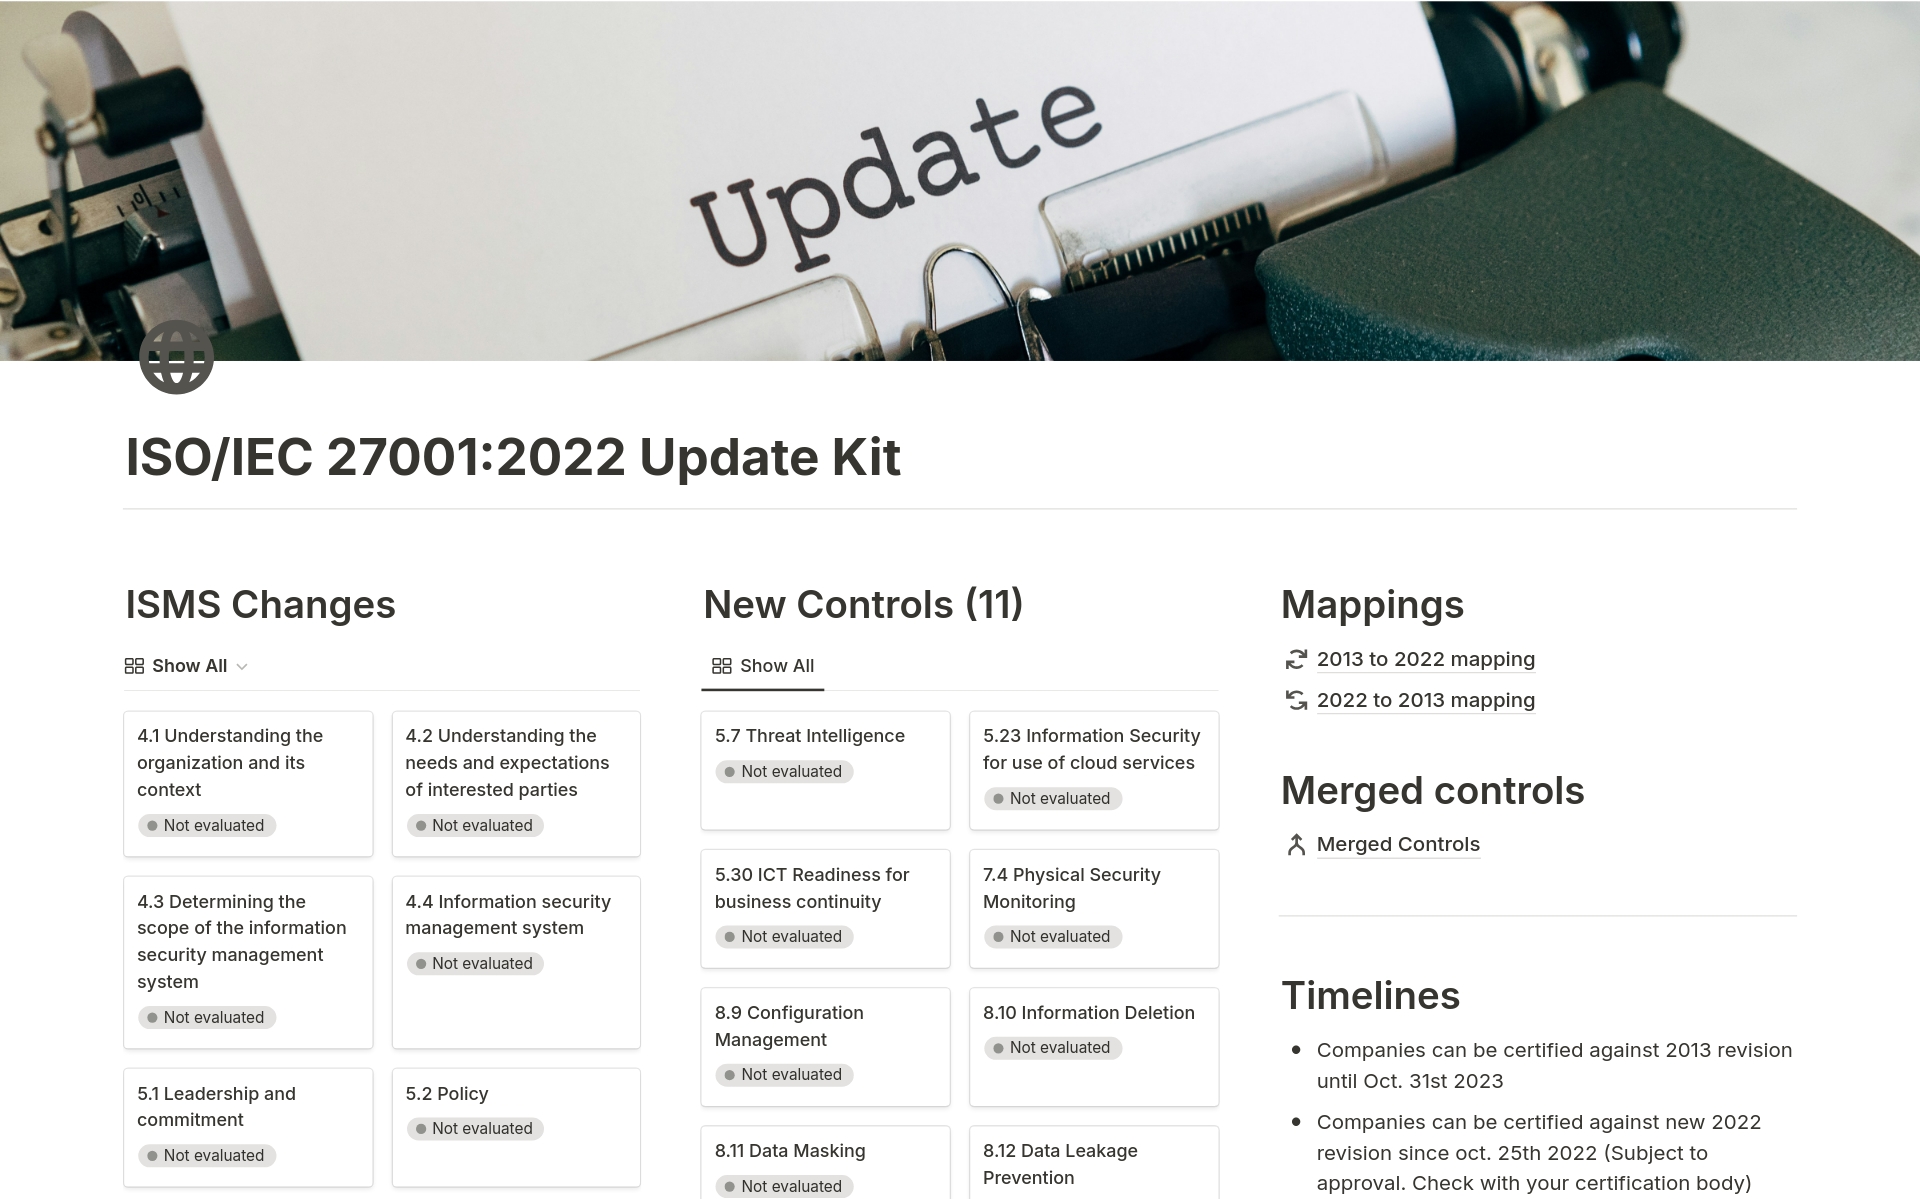 The ISO/IEC 27001:2022 Update Kit includes changes to ISMS, 11 new controls in Annex A, mappings between the 2013 and 2022 revisions, and a list of merged controls.